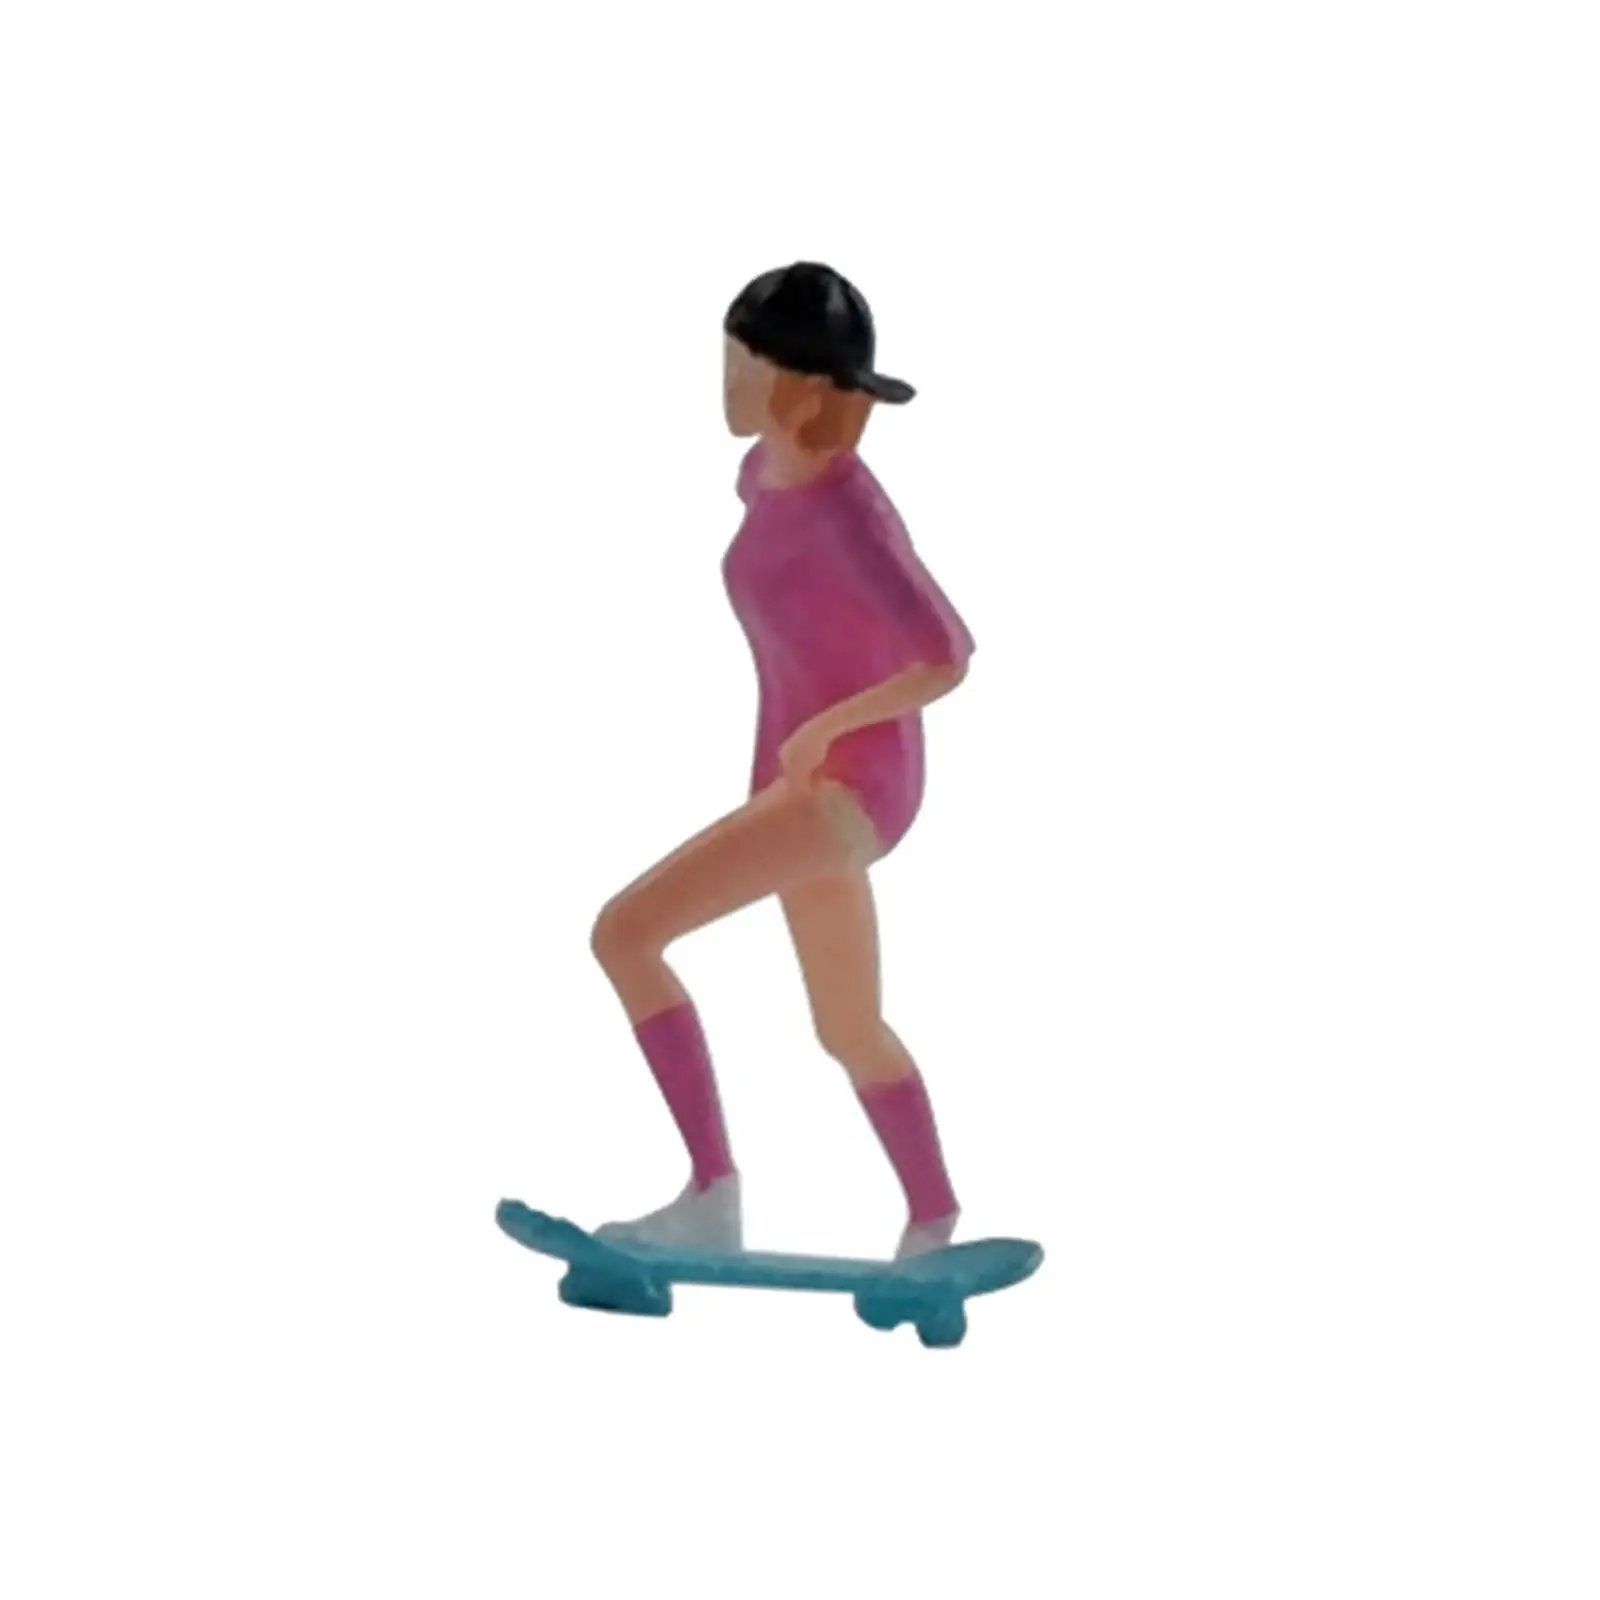 1/64 Scale People Figurines Skateboard Girl Mini People Model for Layout Decoration